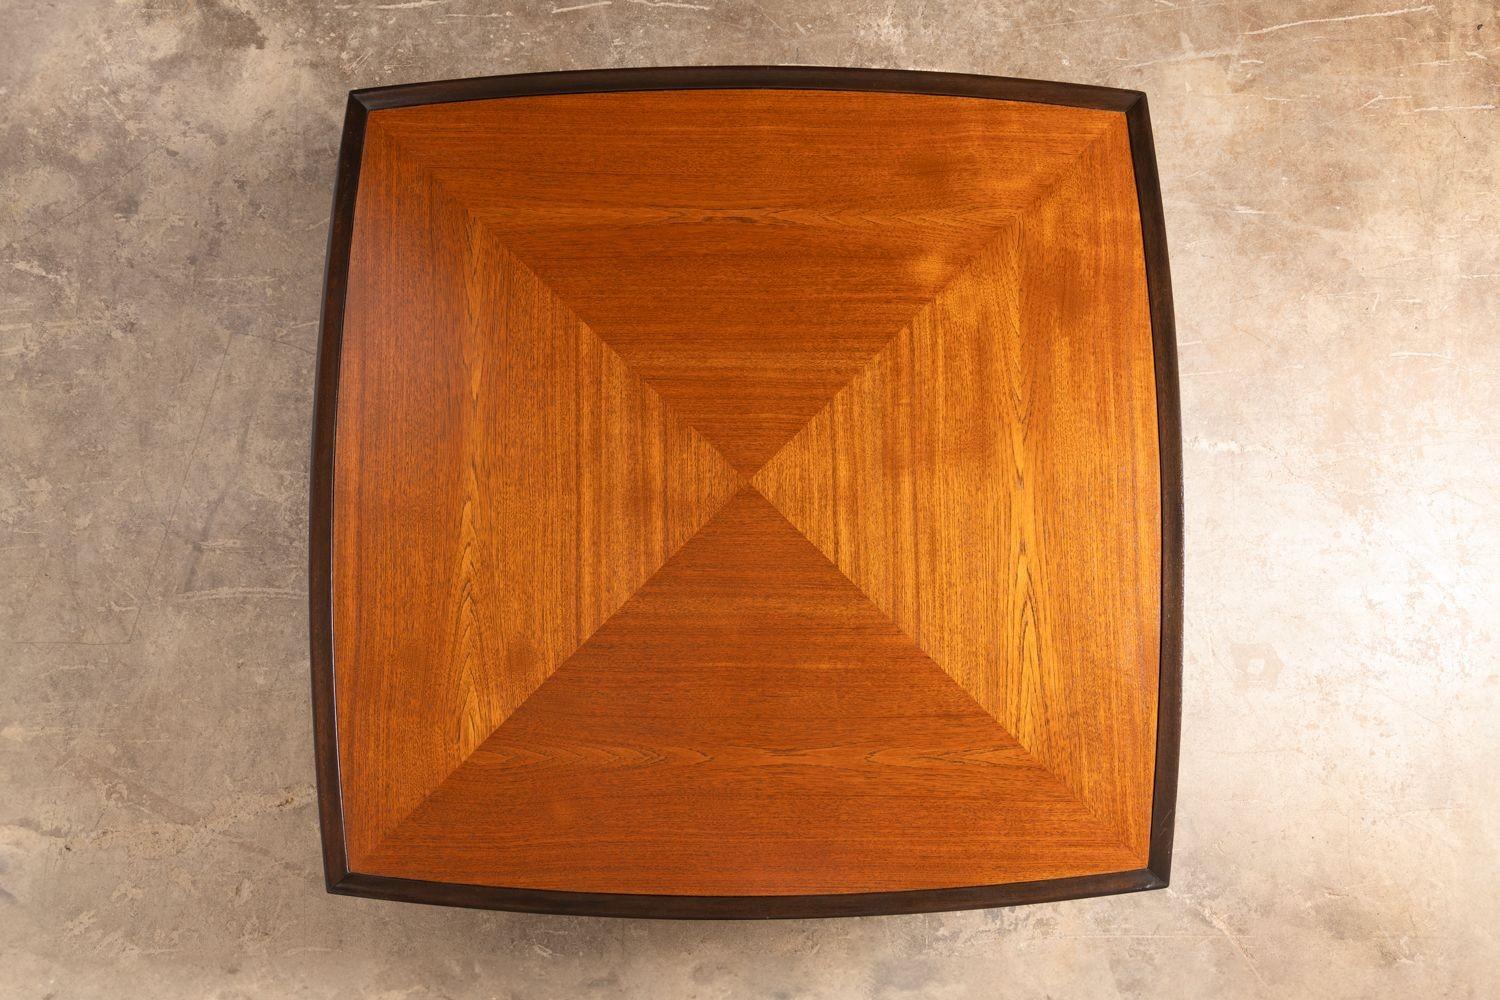 20th Century Edward Wormley for Dunbar Large Scale Square Coffee Table in Mahogany for Dunbar For Sale